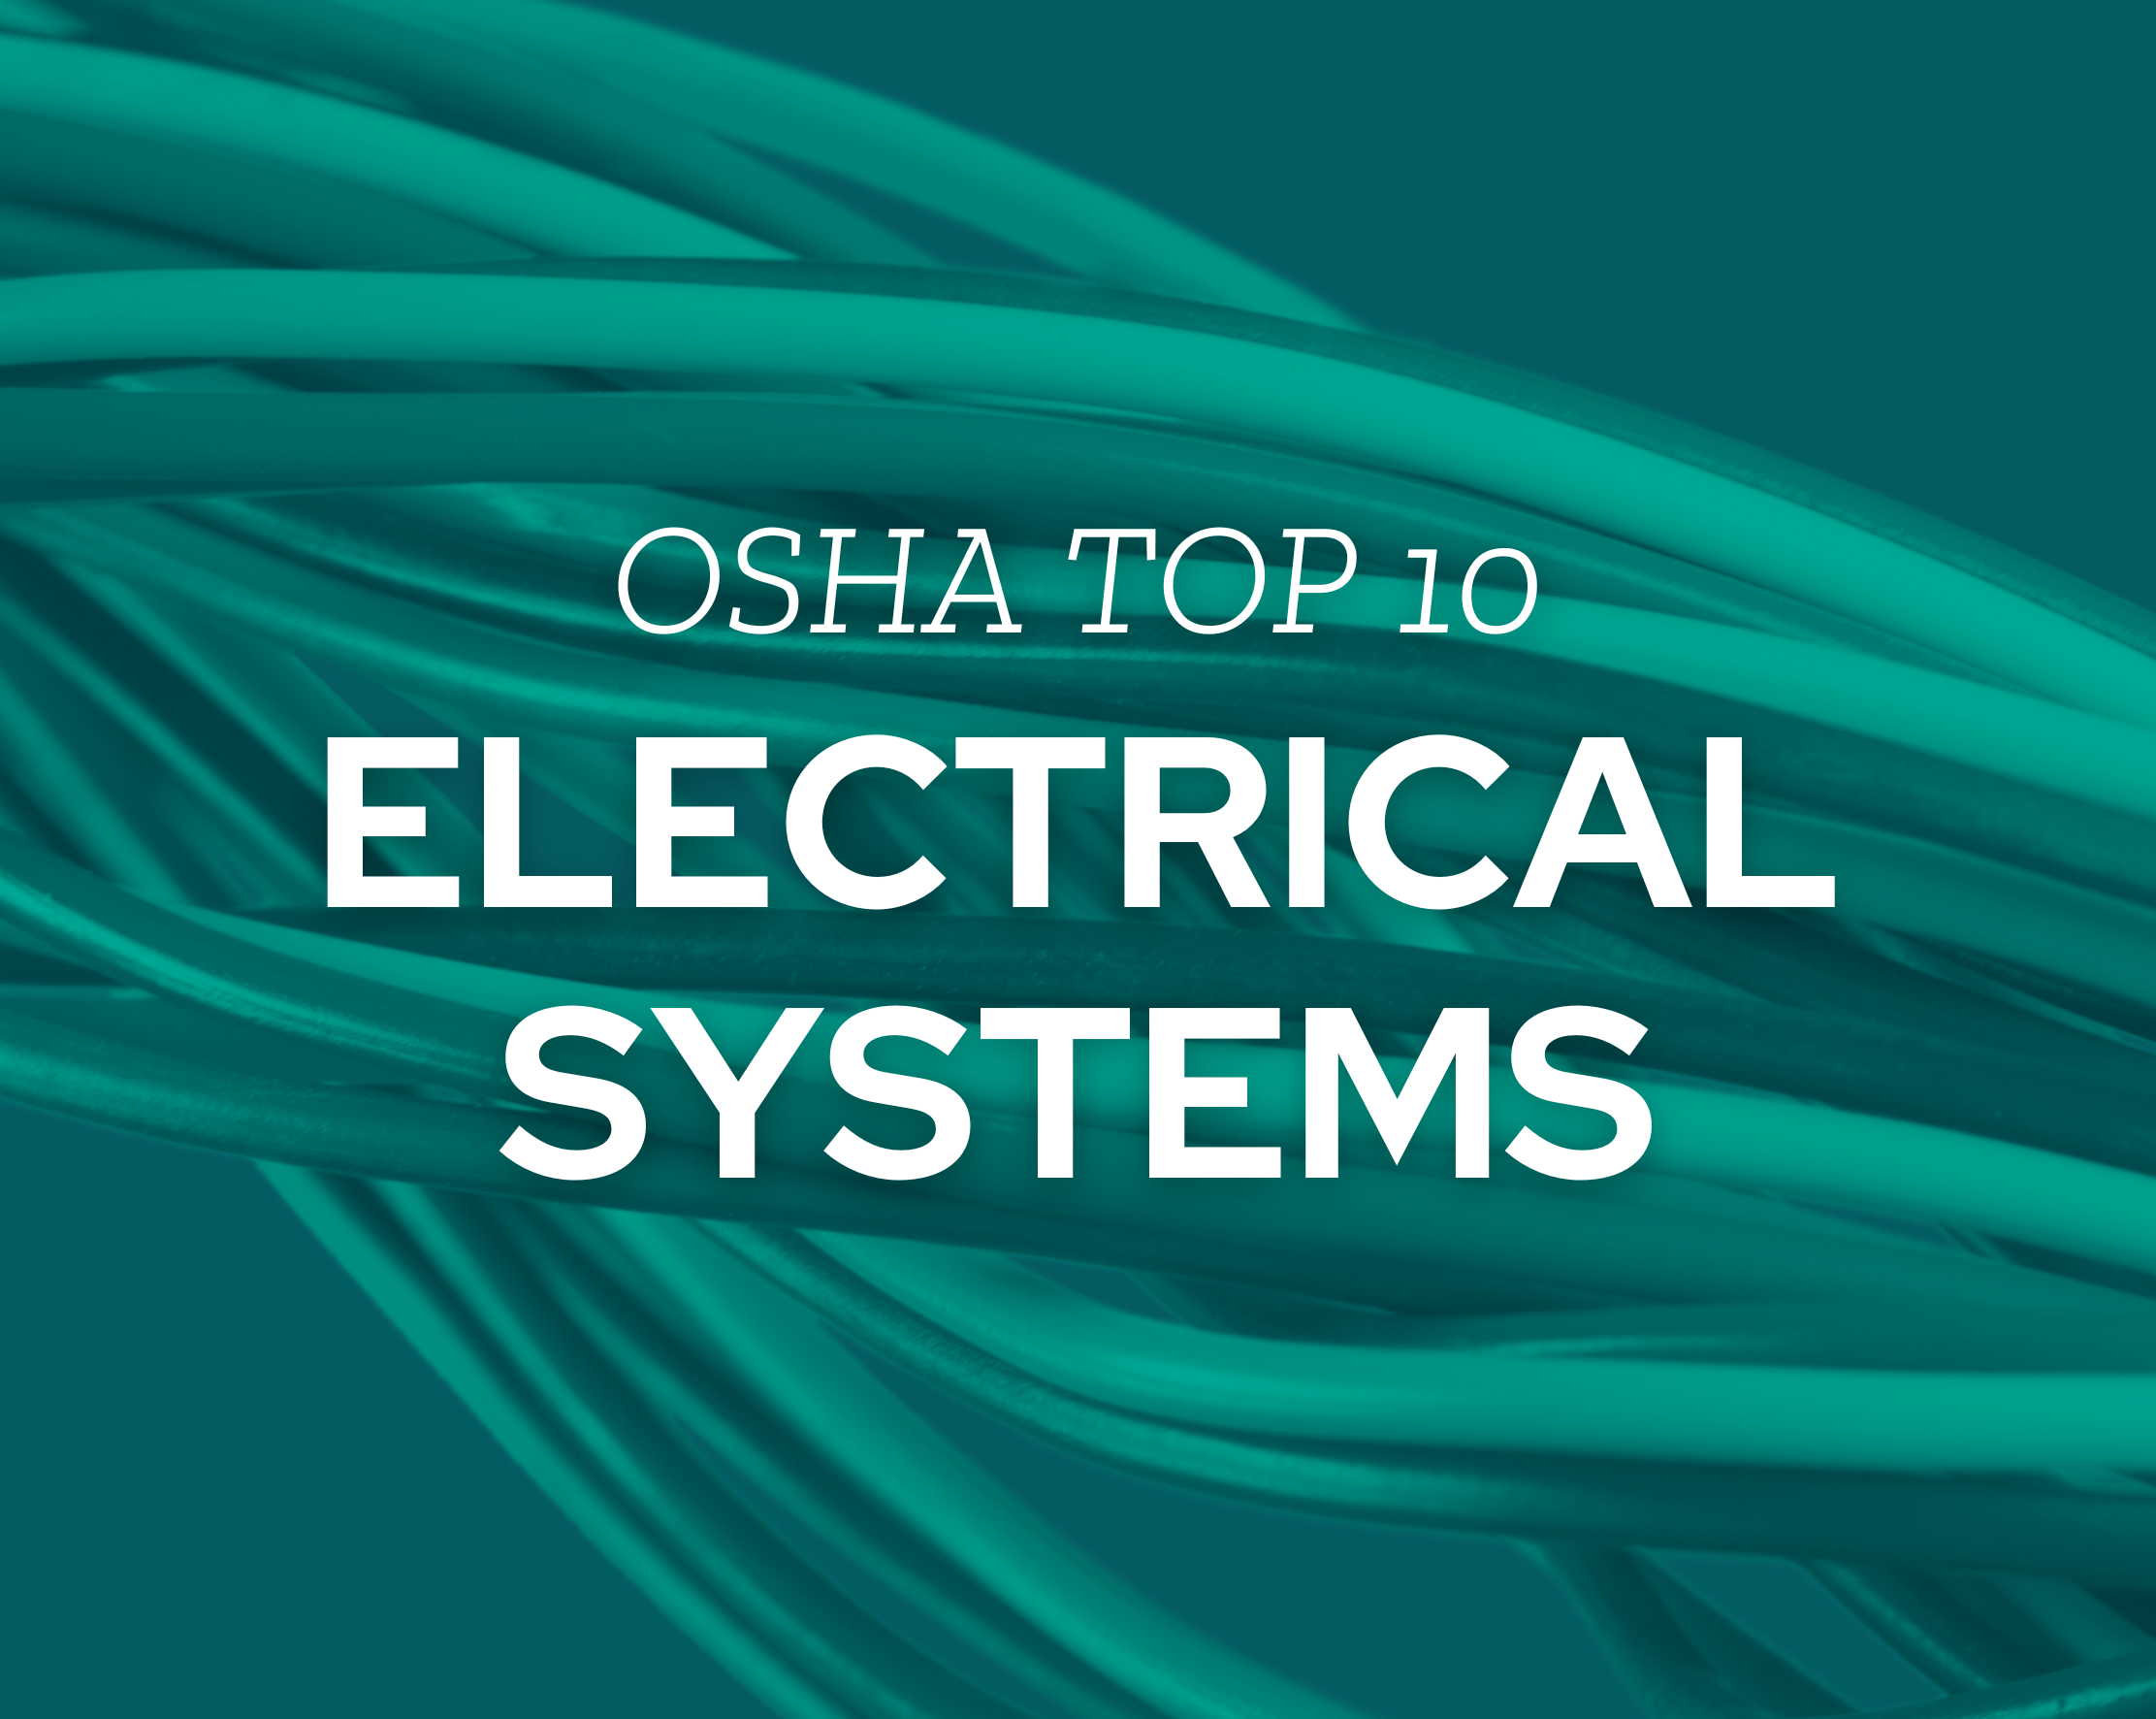 OSHA’s Standards for Electrical Systems: What You Need to Know